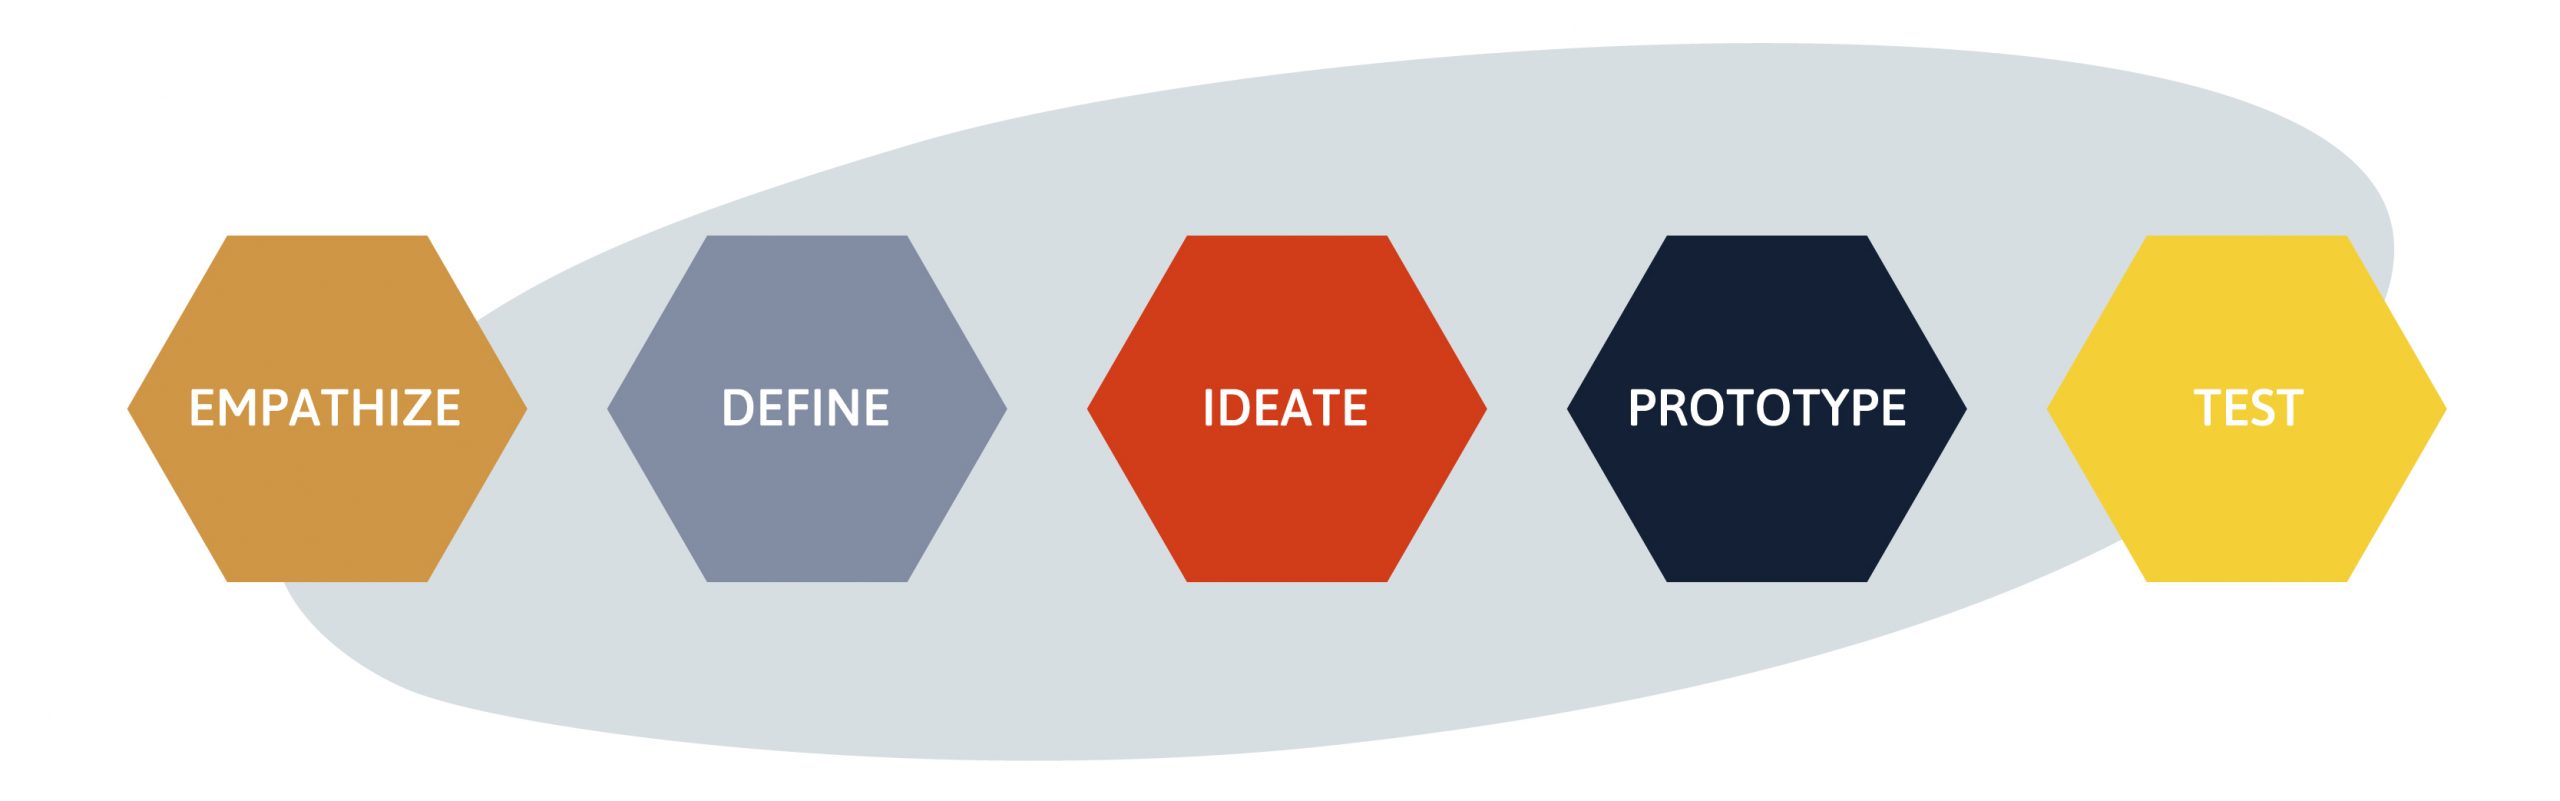 5 stages of a design thinking process